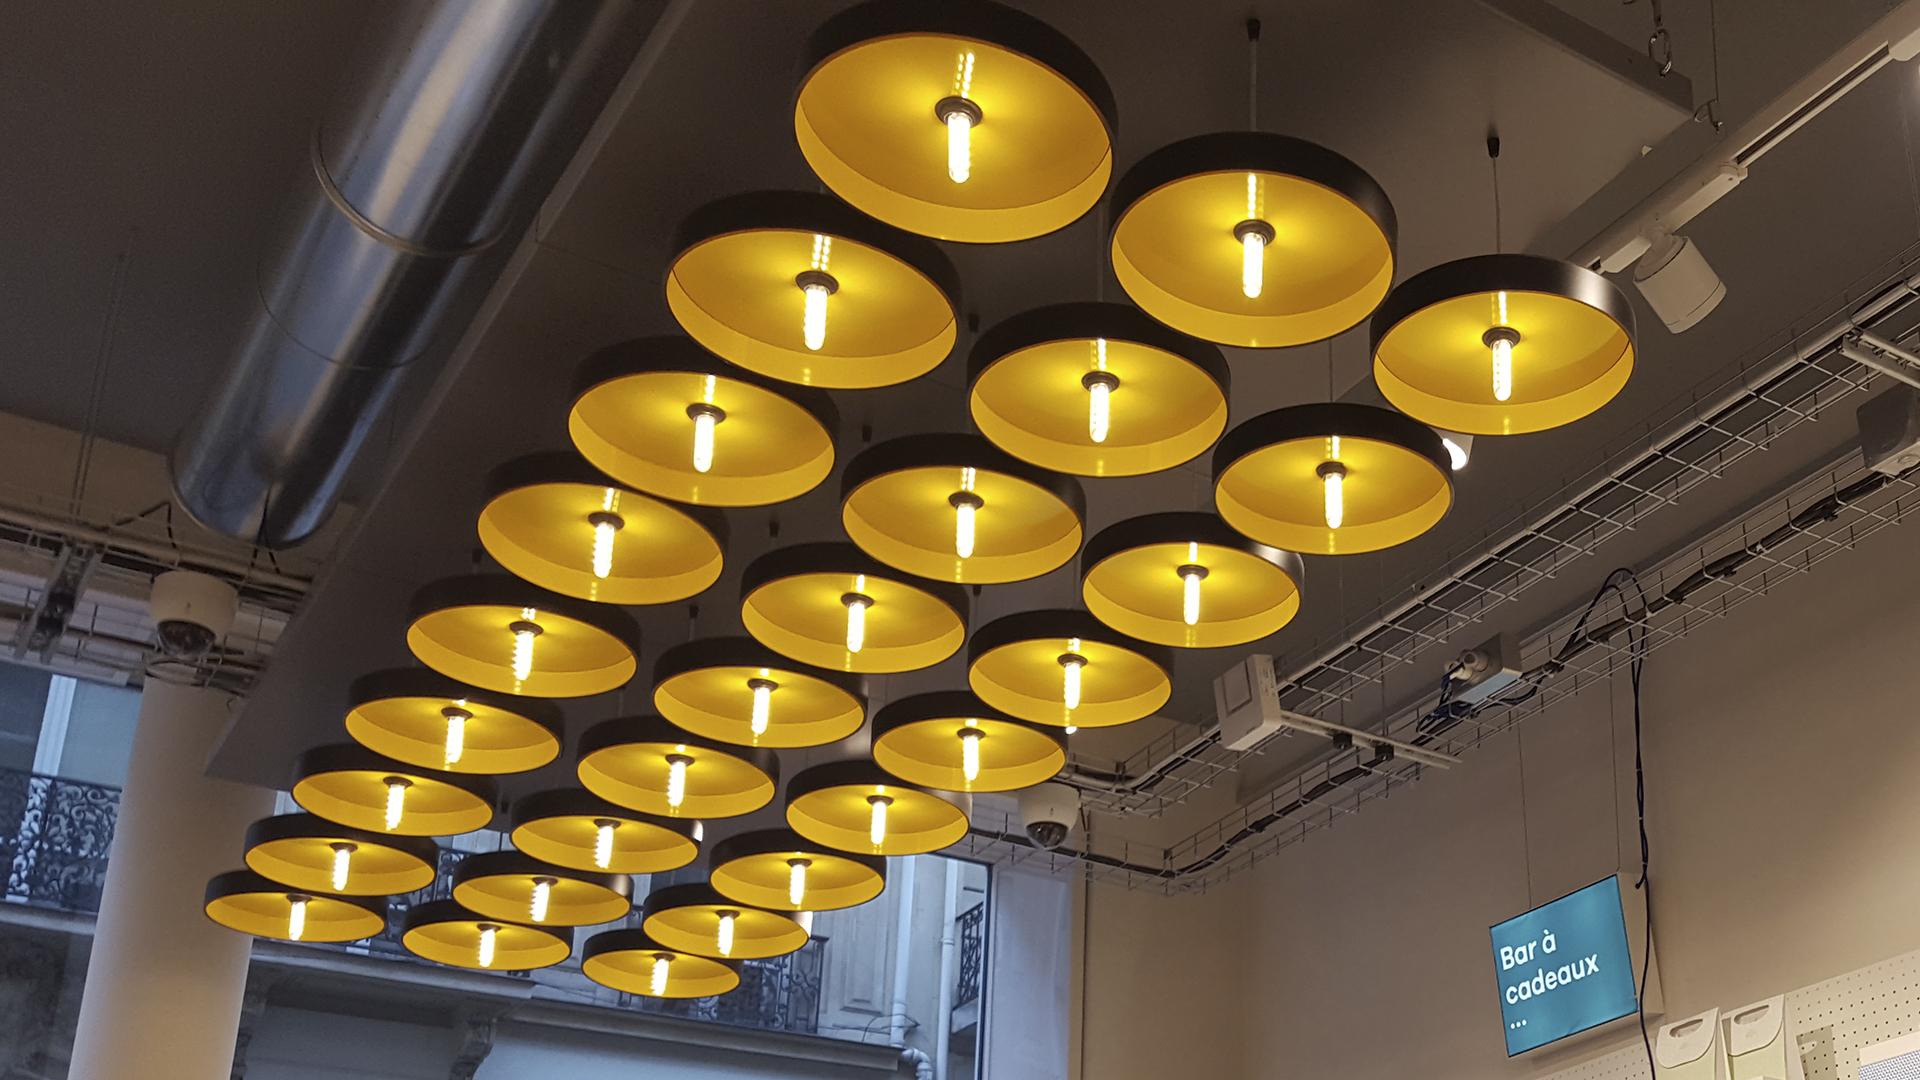  Custom-tailored creative lighting solutions by Visotec